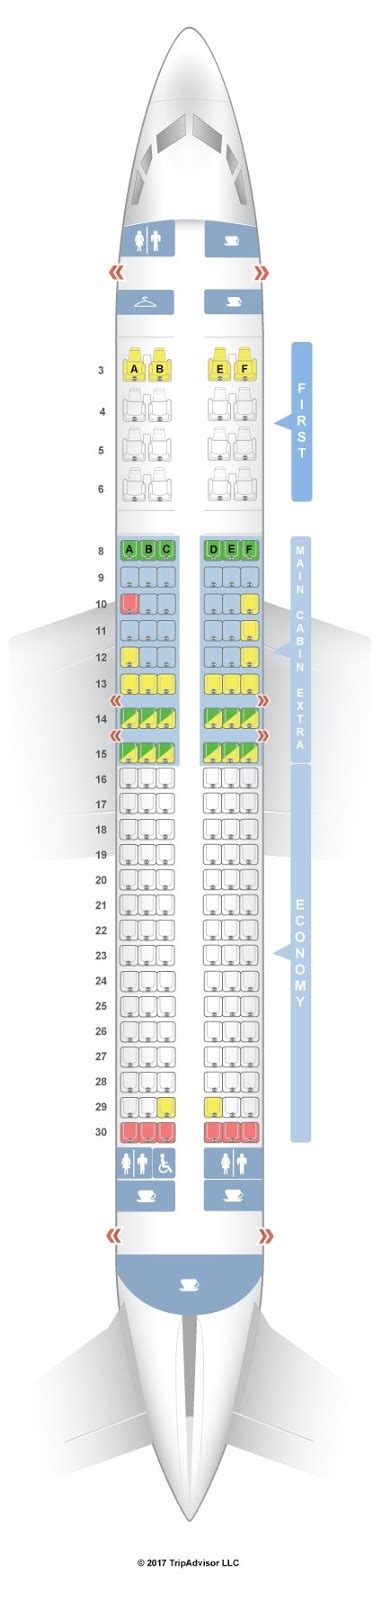 Airplane Boeing 737-800 (738) v1 American Airlines with 3 classes and 160 seats on board. Use airplane seat map to find which ones are more comfortable and which should be …. 